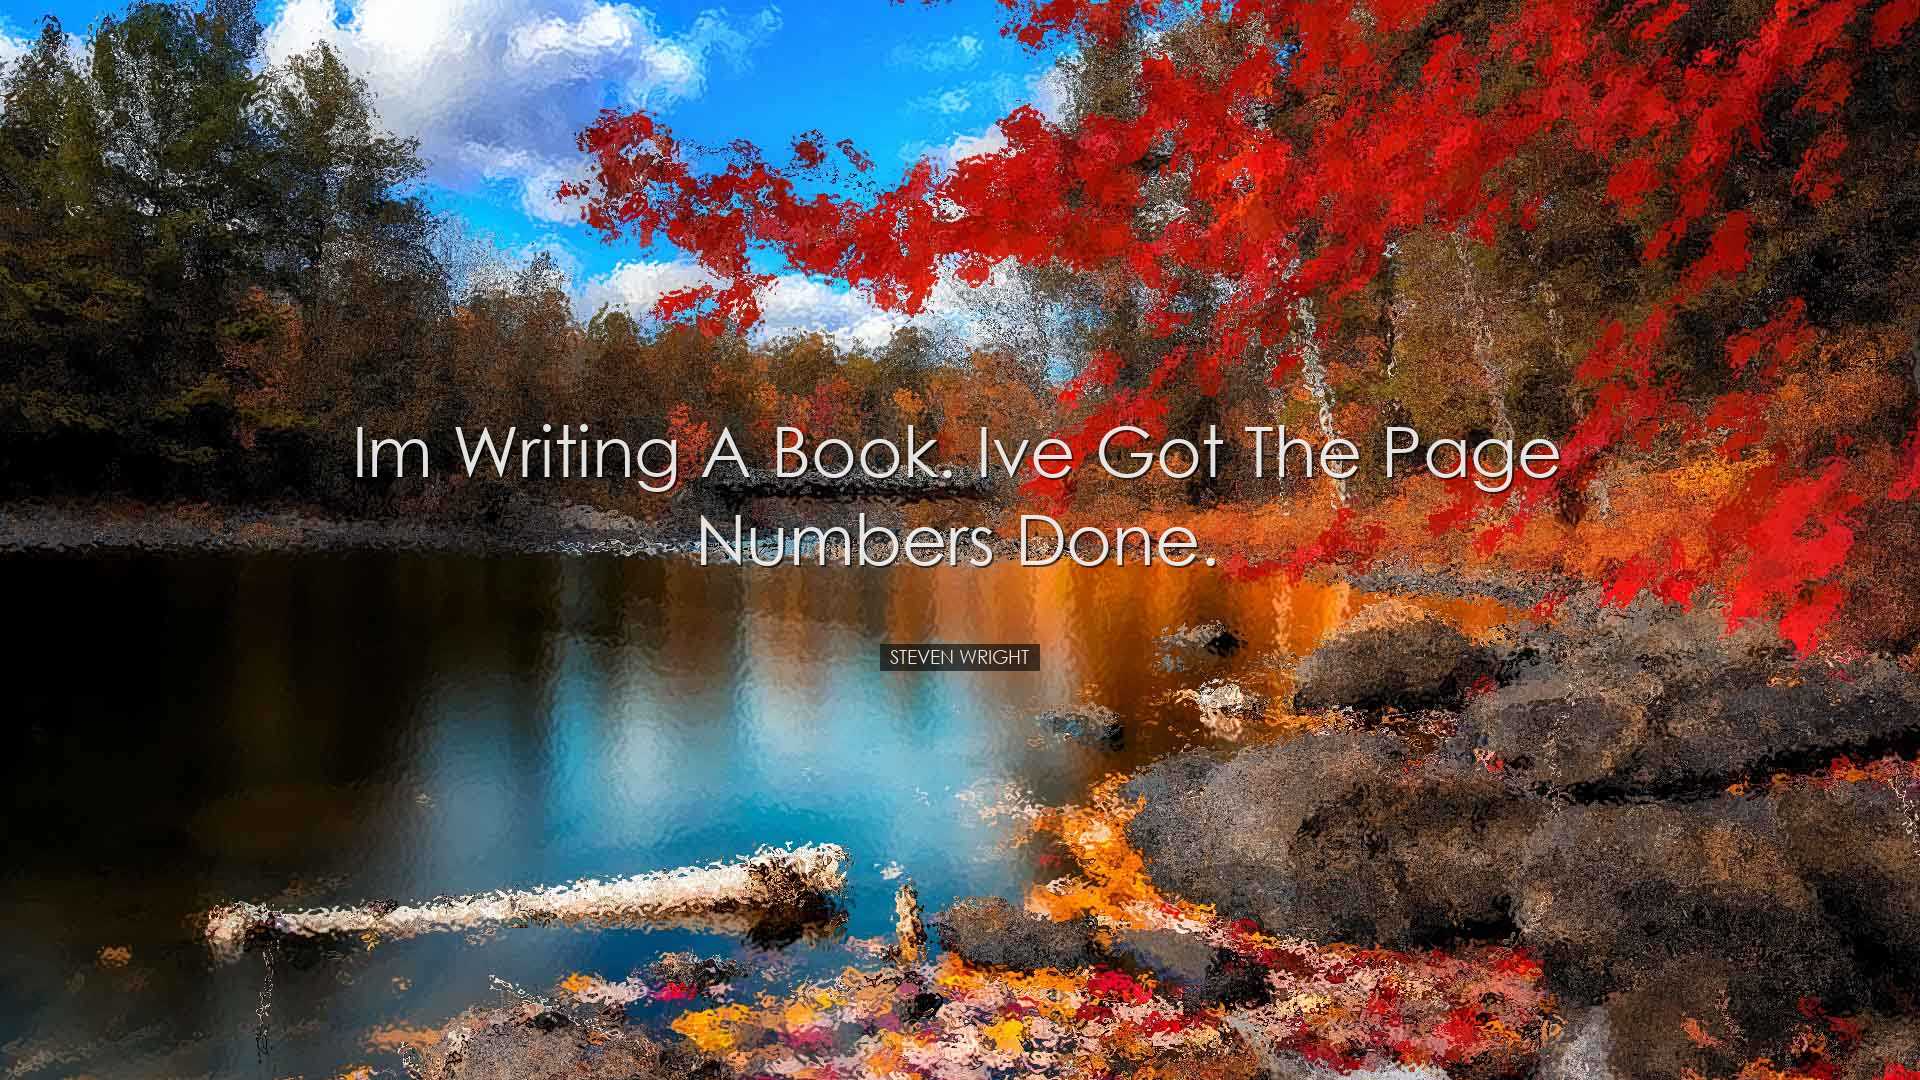 Im writing a book. Ive got the page numbers done. - Steven Wright